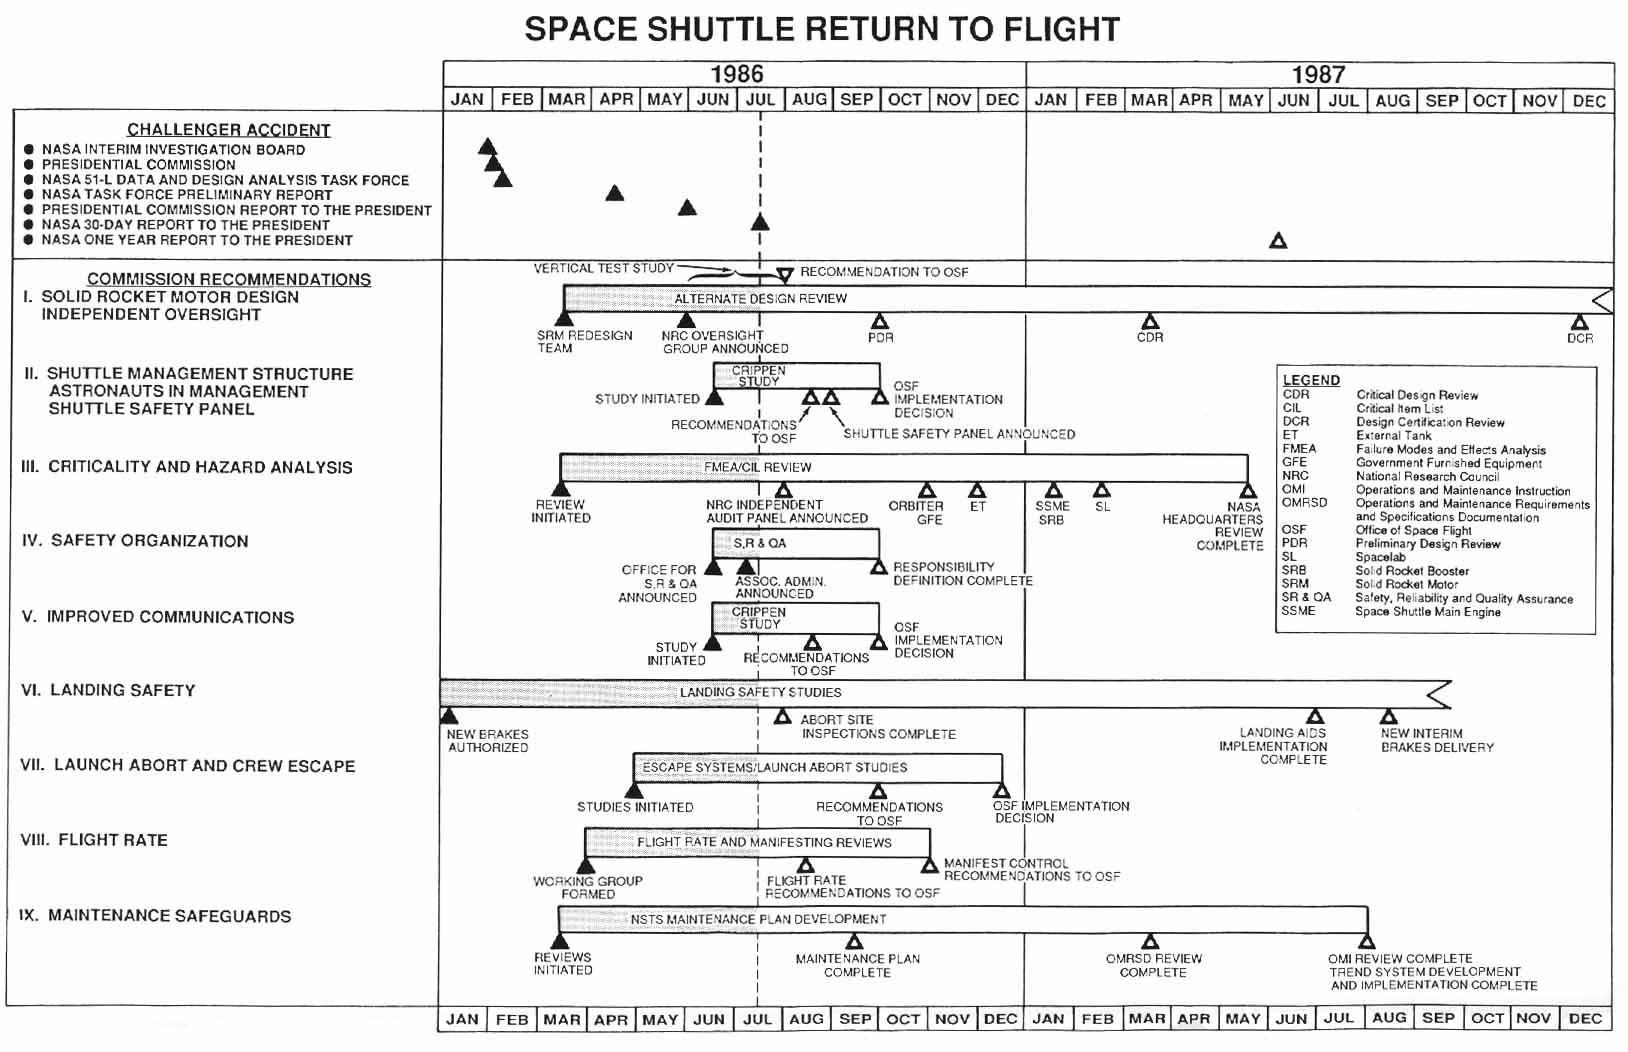 SPACE SHUTTLE RETURN TO FLIGHT: Planned activities between January 1986 and December 1987

